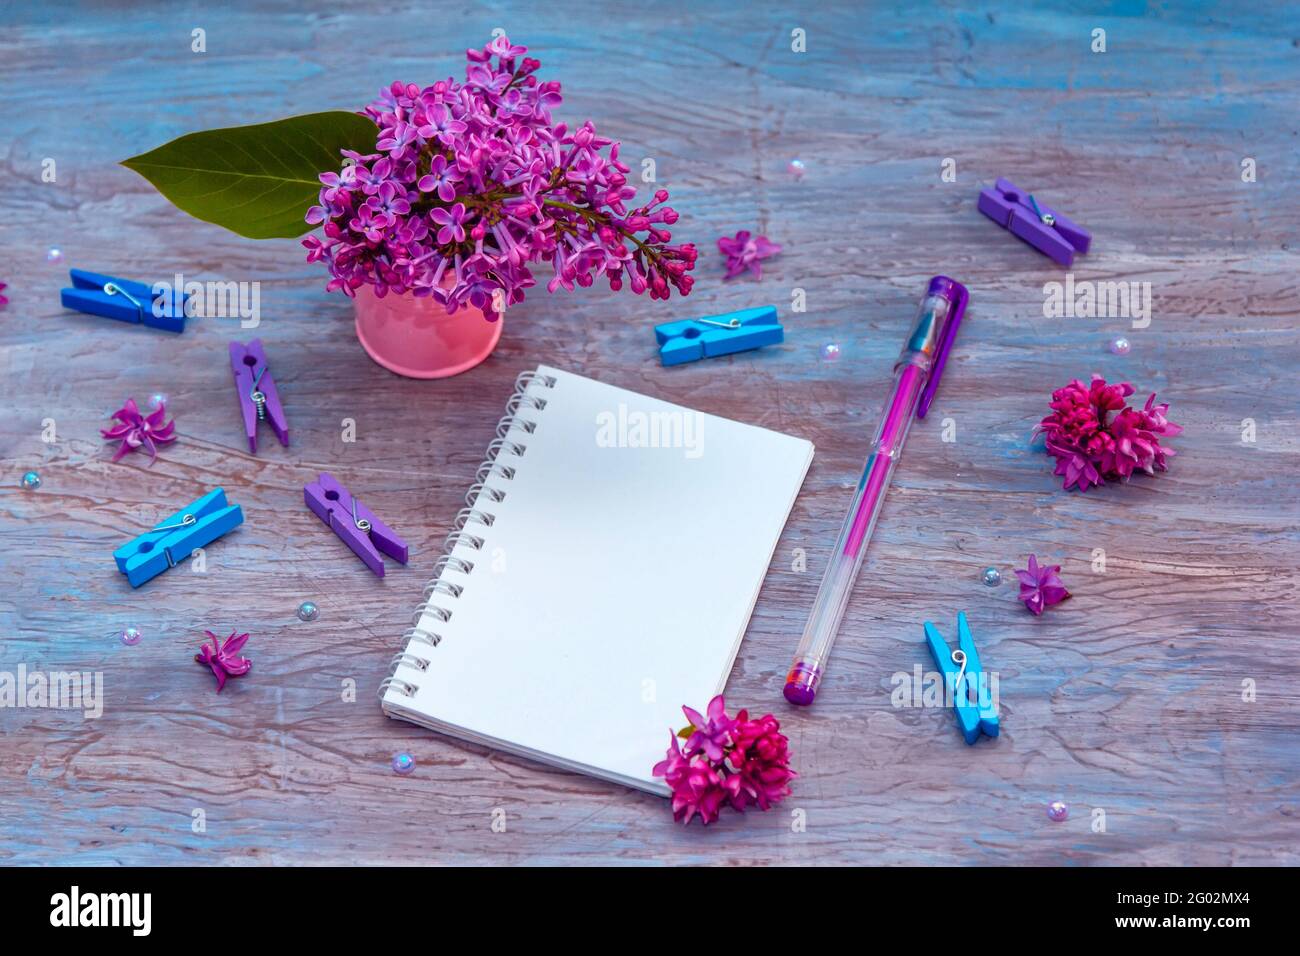 Blank notebook, pen with purple ink, lilac flowers and colorful pegs on vintage wooden painted blue background. Stock Photo